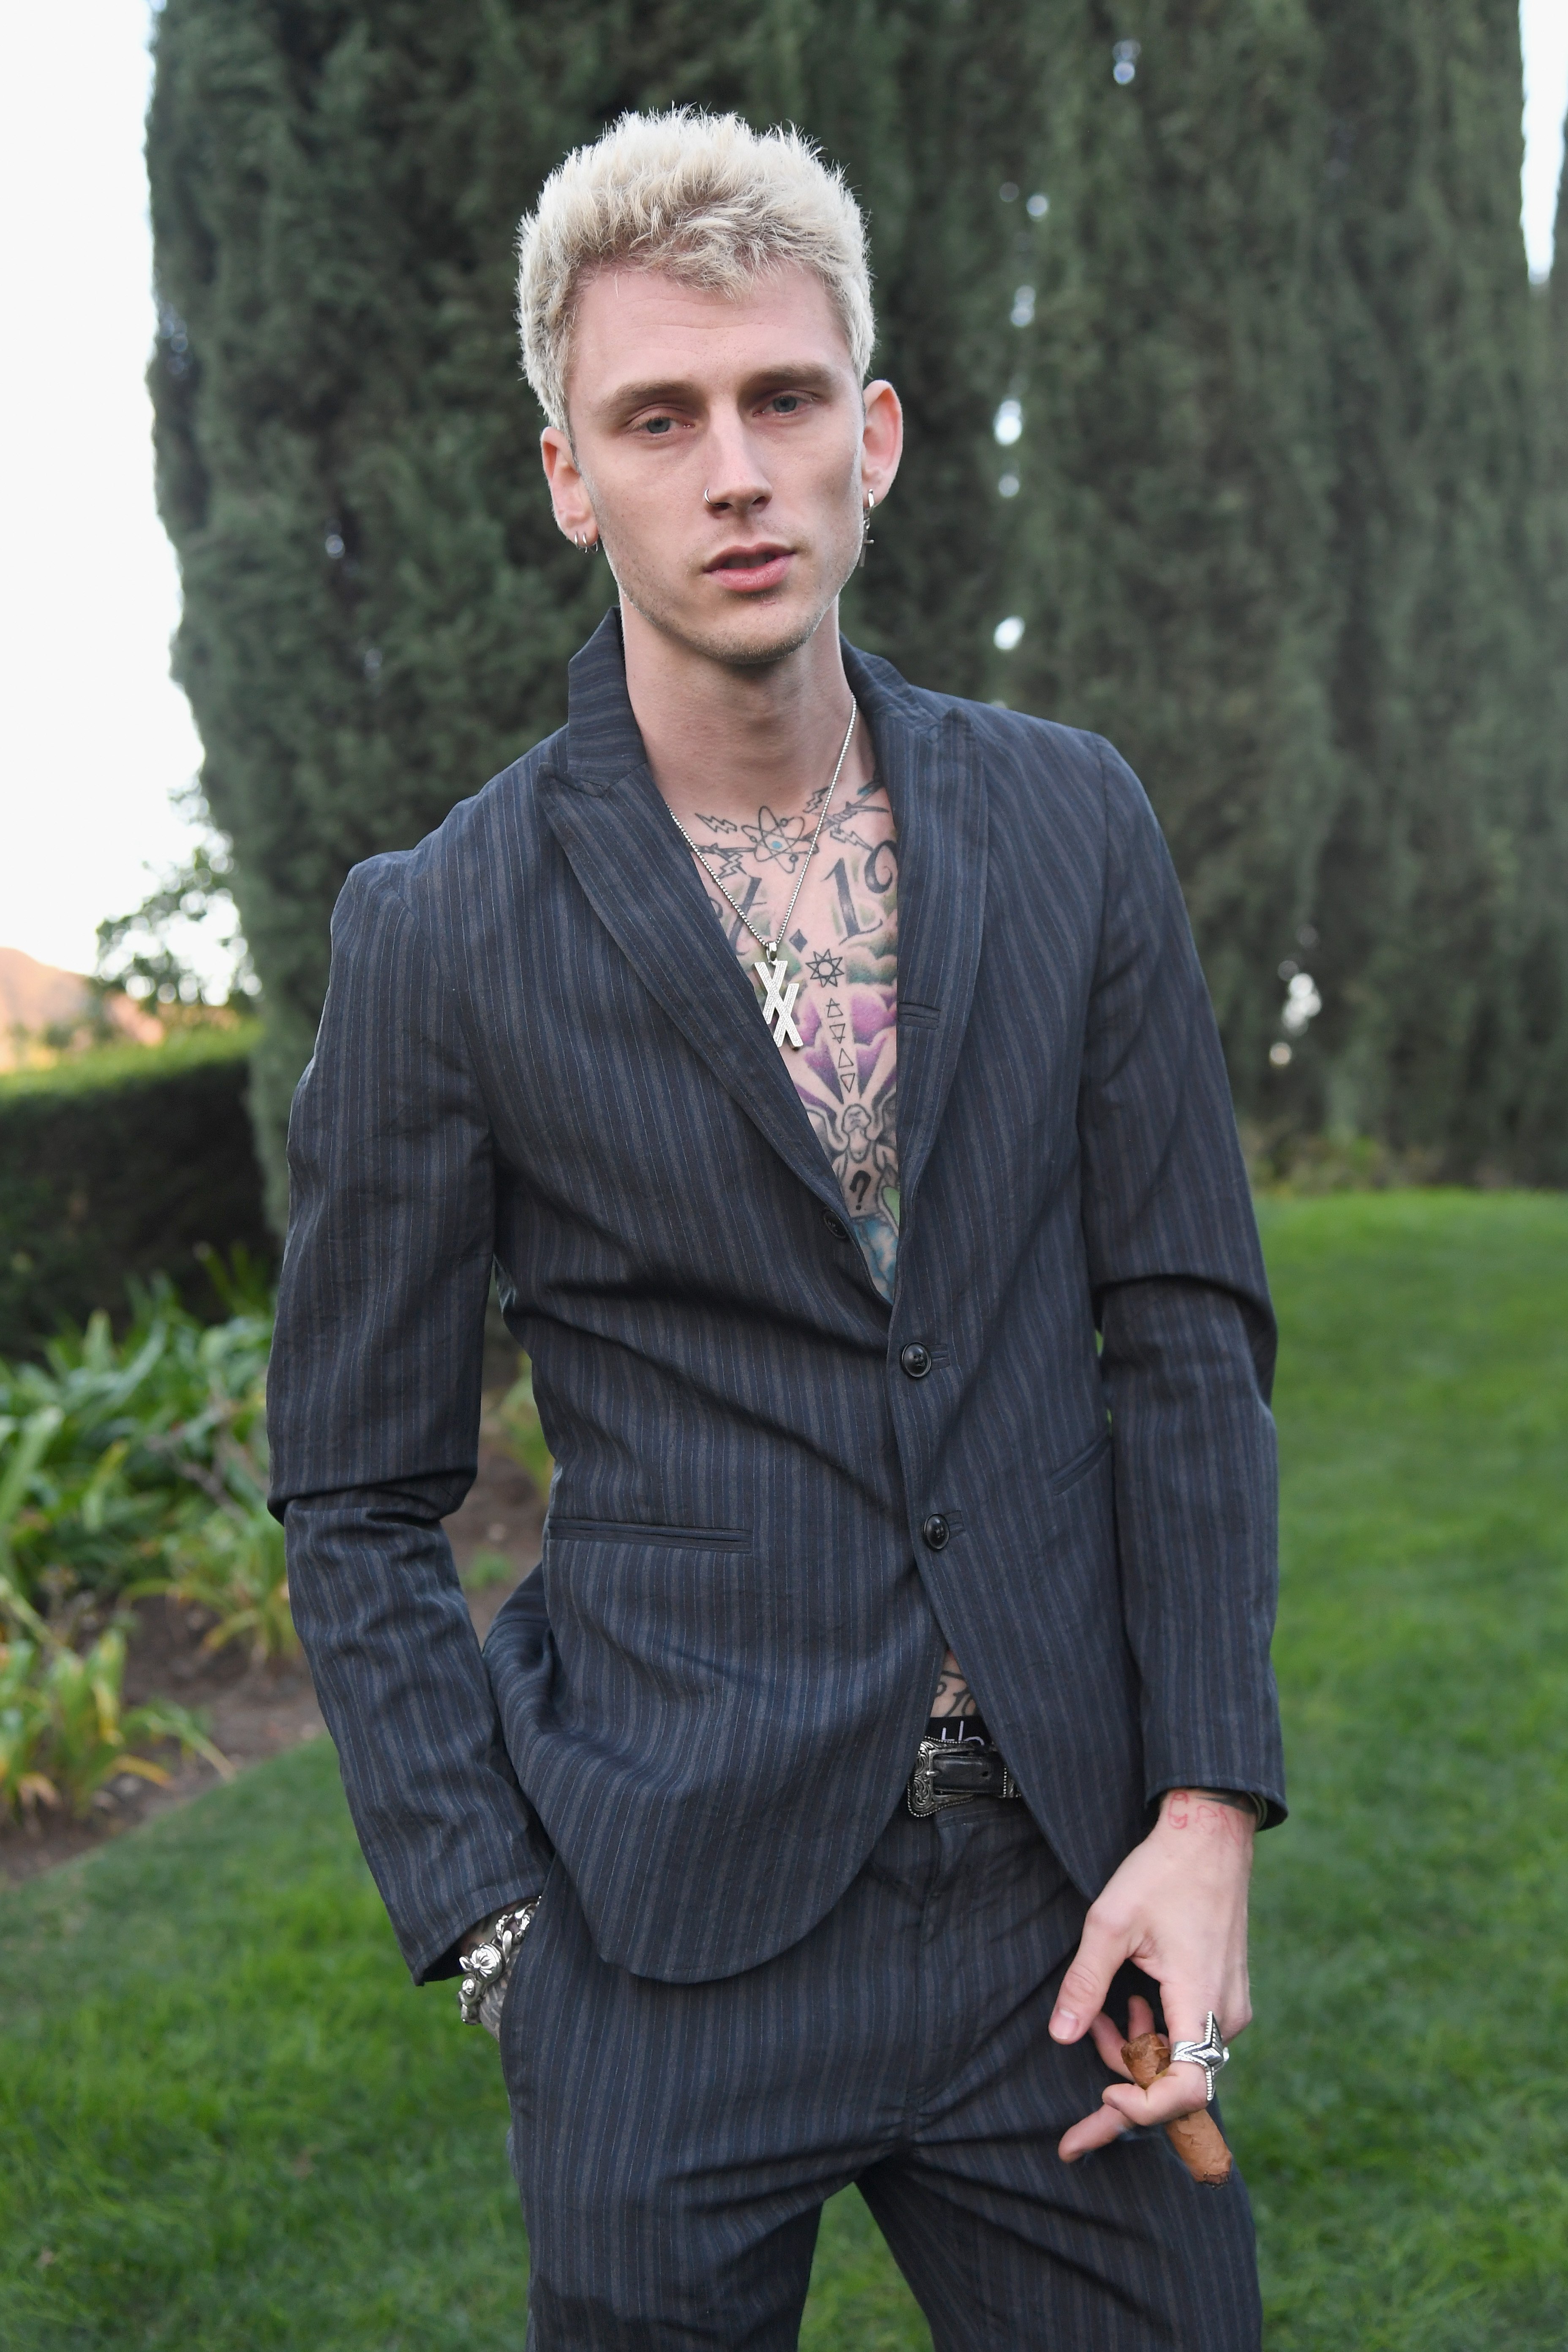 Machine Gun Kelly attends the 2019 Roc Nation THE BRUNCH on February 9, 2019, in Los Angeles, California. | Source: Getty Images